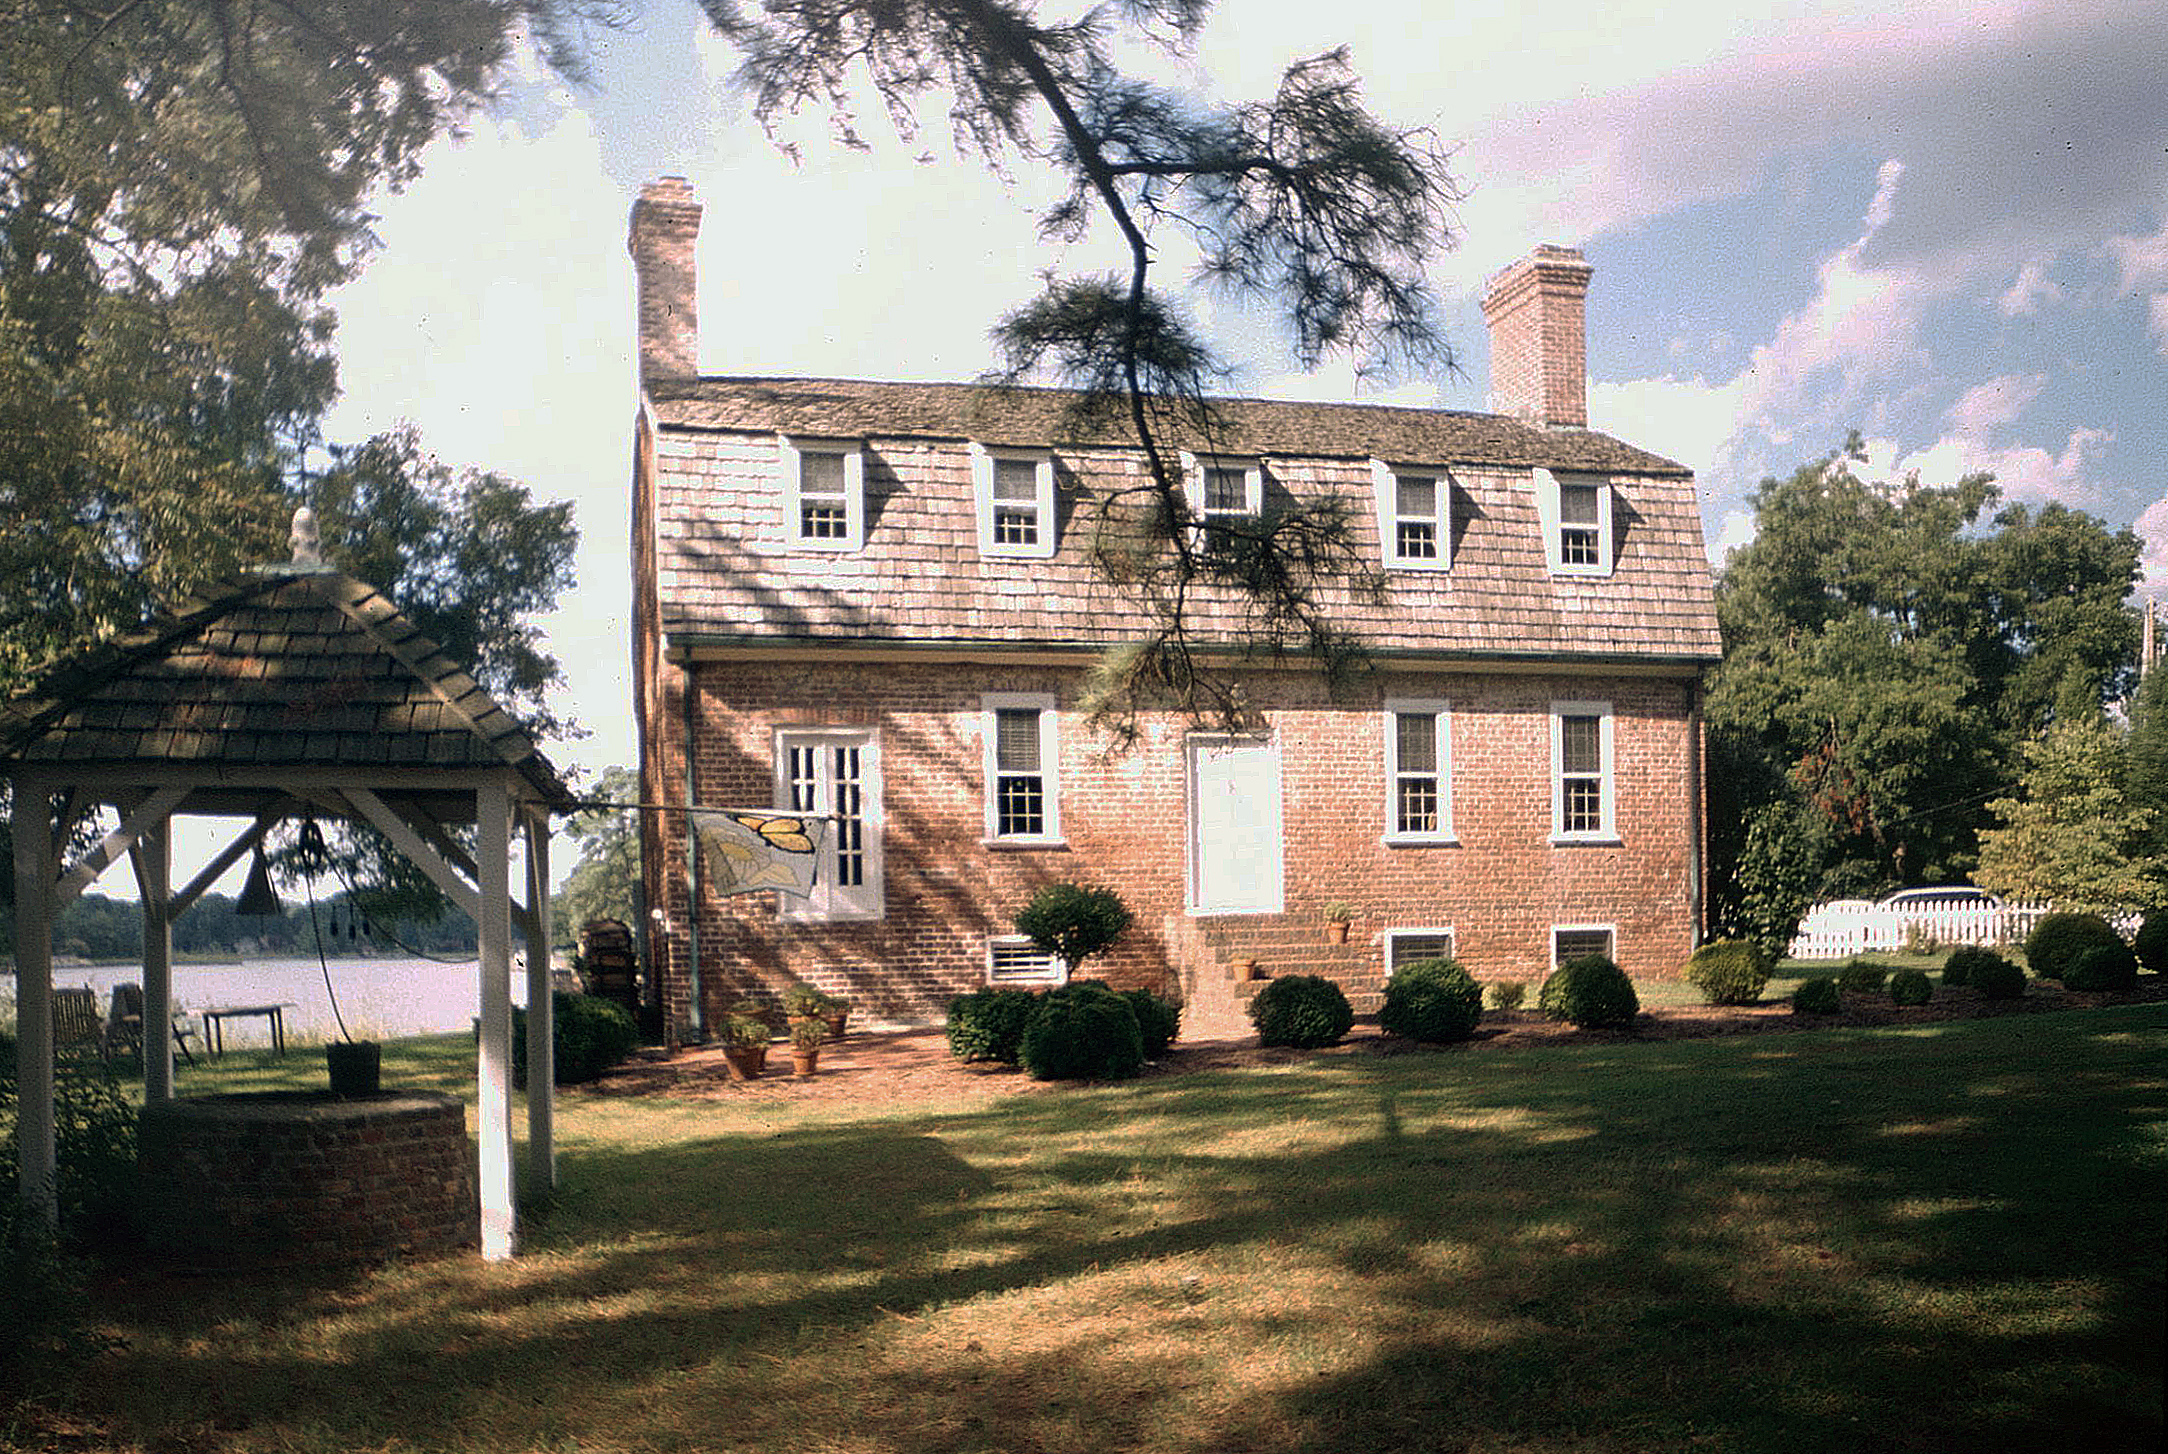 134-0022_Thomas_Murray_House_2003_exterior_front_elevation_VLR_online